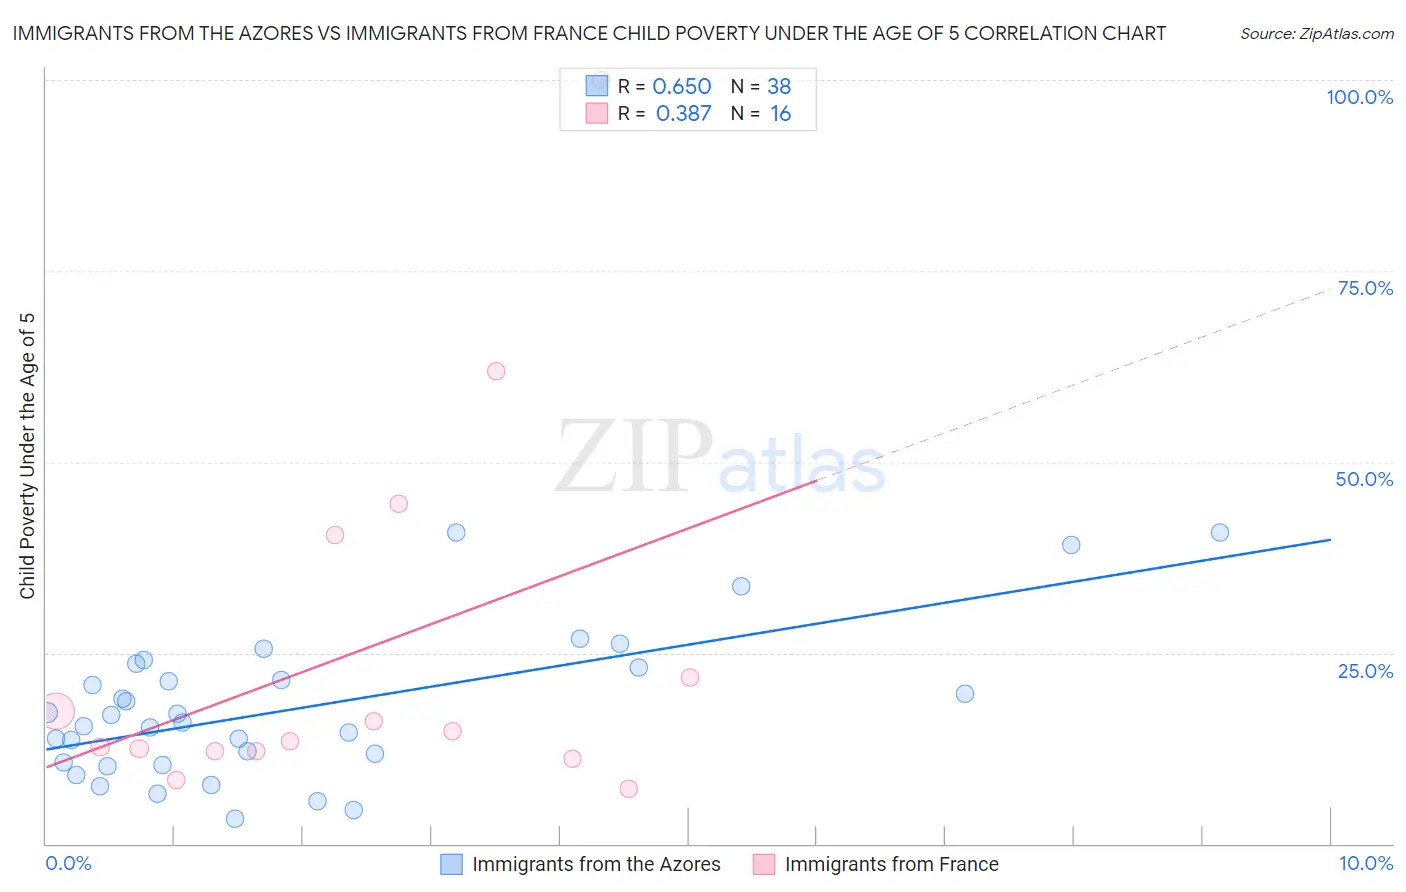 Immigrants from the Azores vs Immigrants from France Child Poverty Under the Age of 5